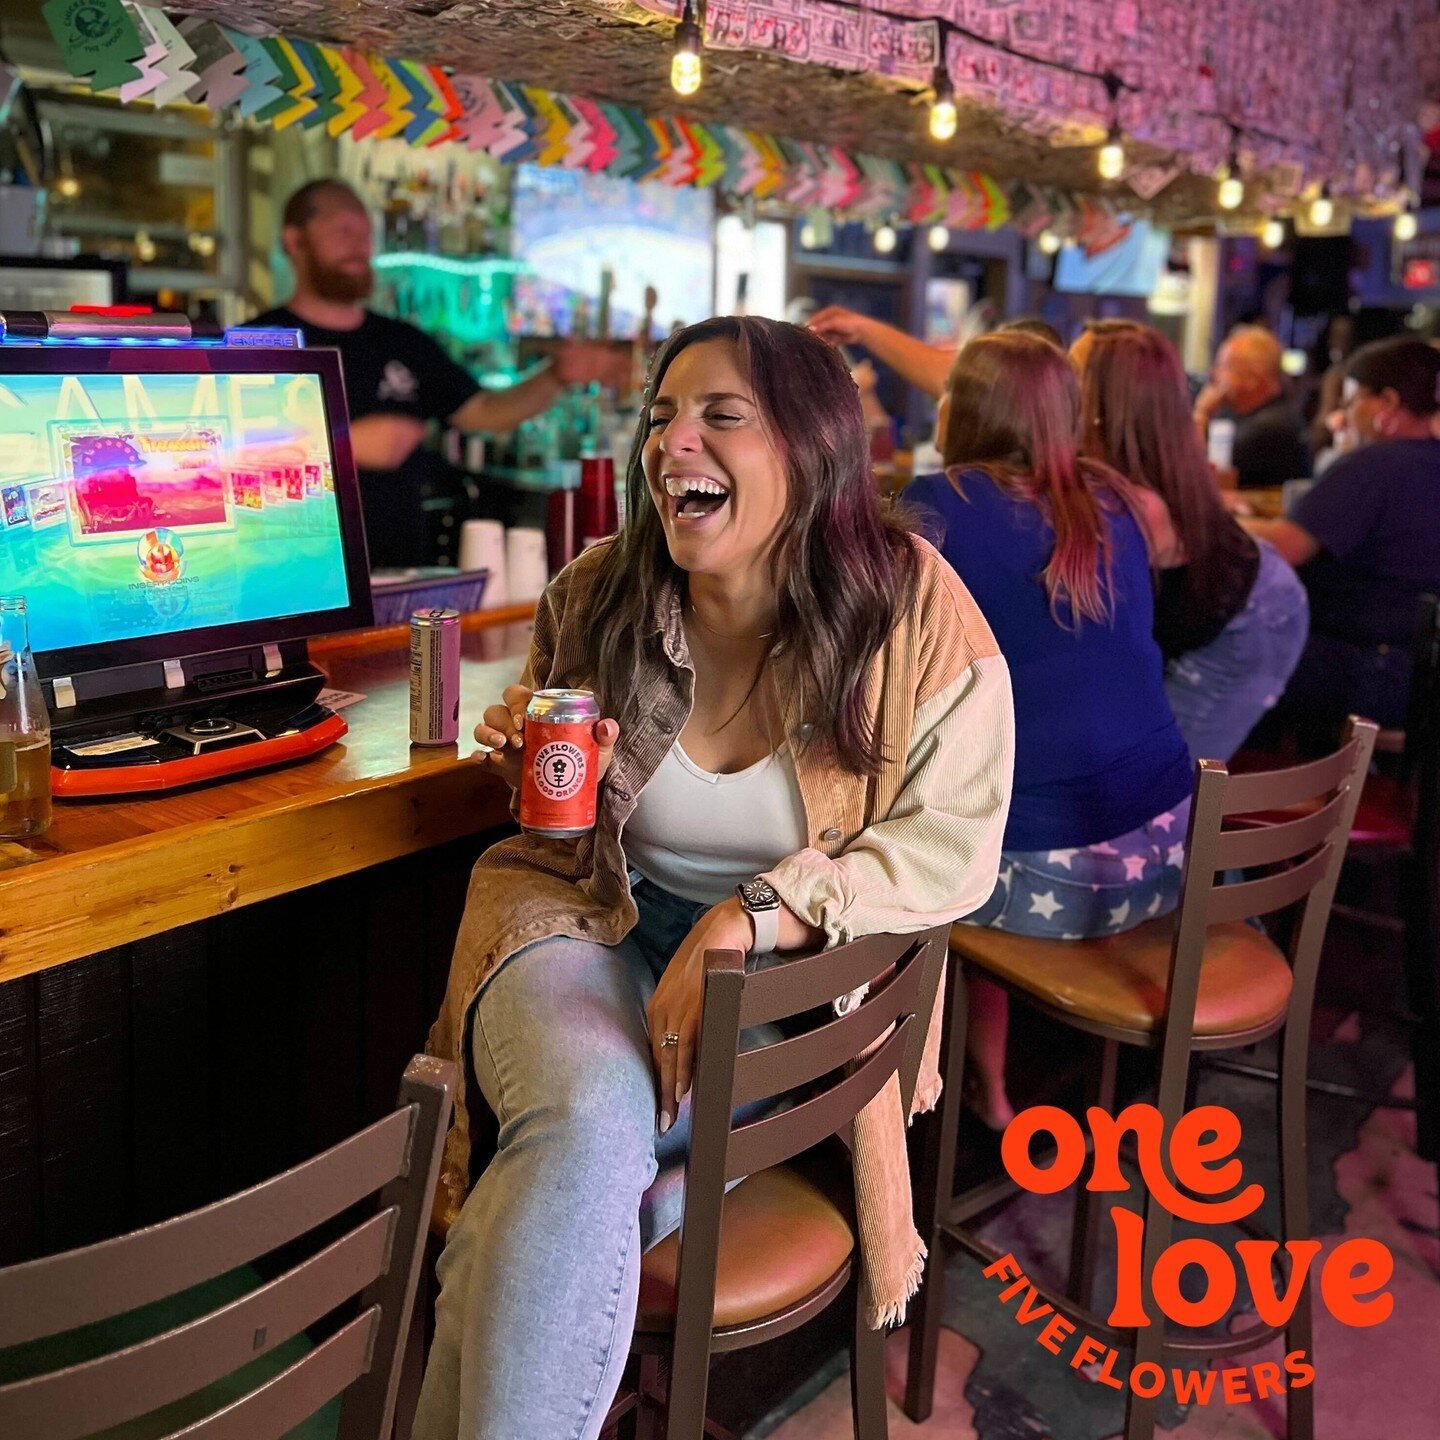 Bar Hopper 🍸⁠
&bull;⁠
Don&rsquo;t ONLY try this at home. Why not mix in a refreshing twist on your night out with your crew? Is Bar Hoppin&rsquo; your &ldquo;One Love&rdquo;? Whatever your love, enjoy it more with Five Flowers.⁠
&bull;⁠
&bull;⁠
#one